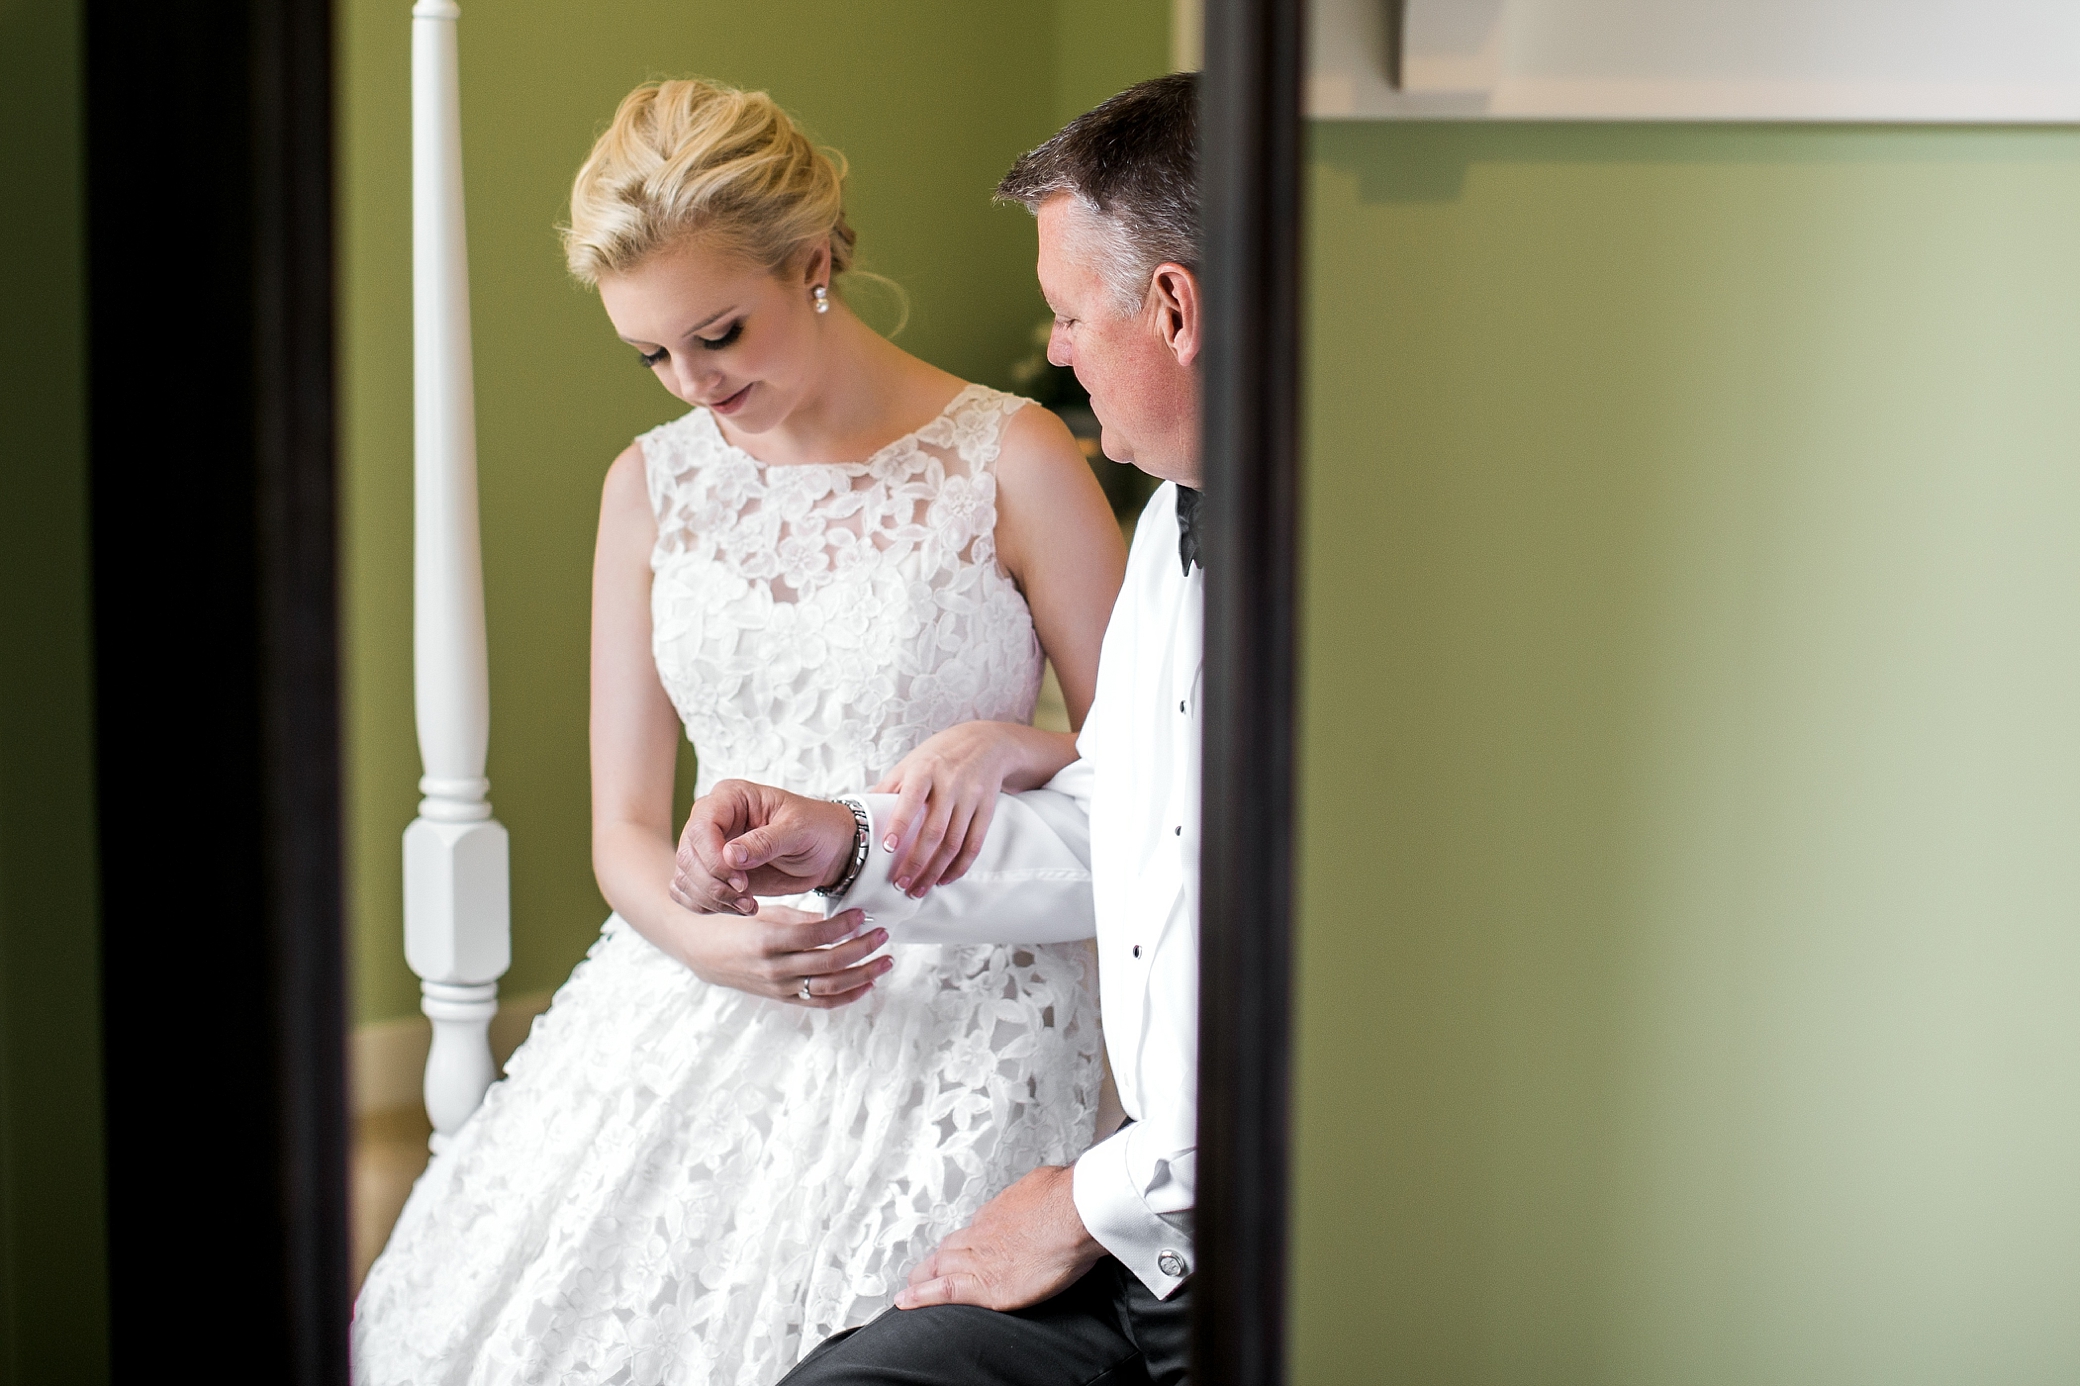 Bride and Father Gift exchange on wedding day | | Must Have Moments on Your Wedding Day